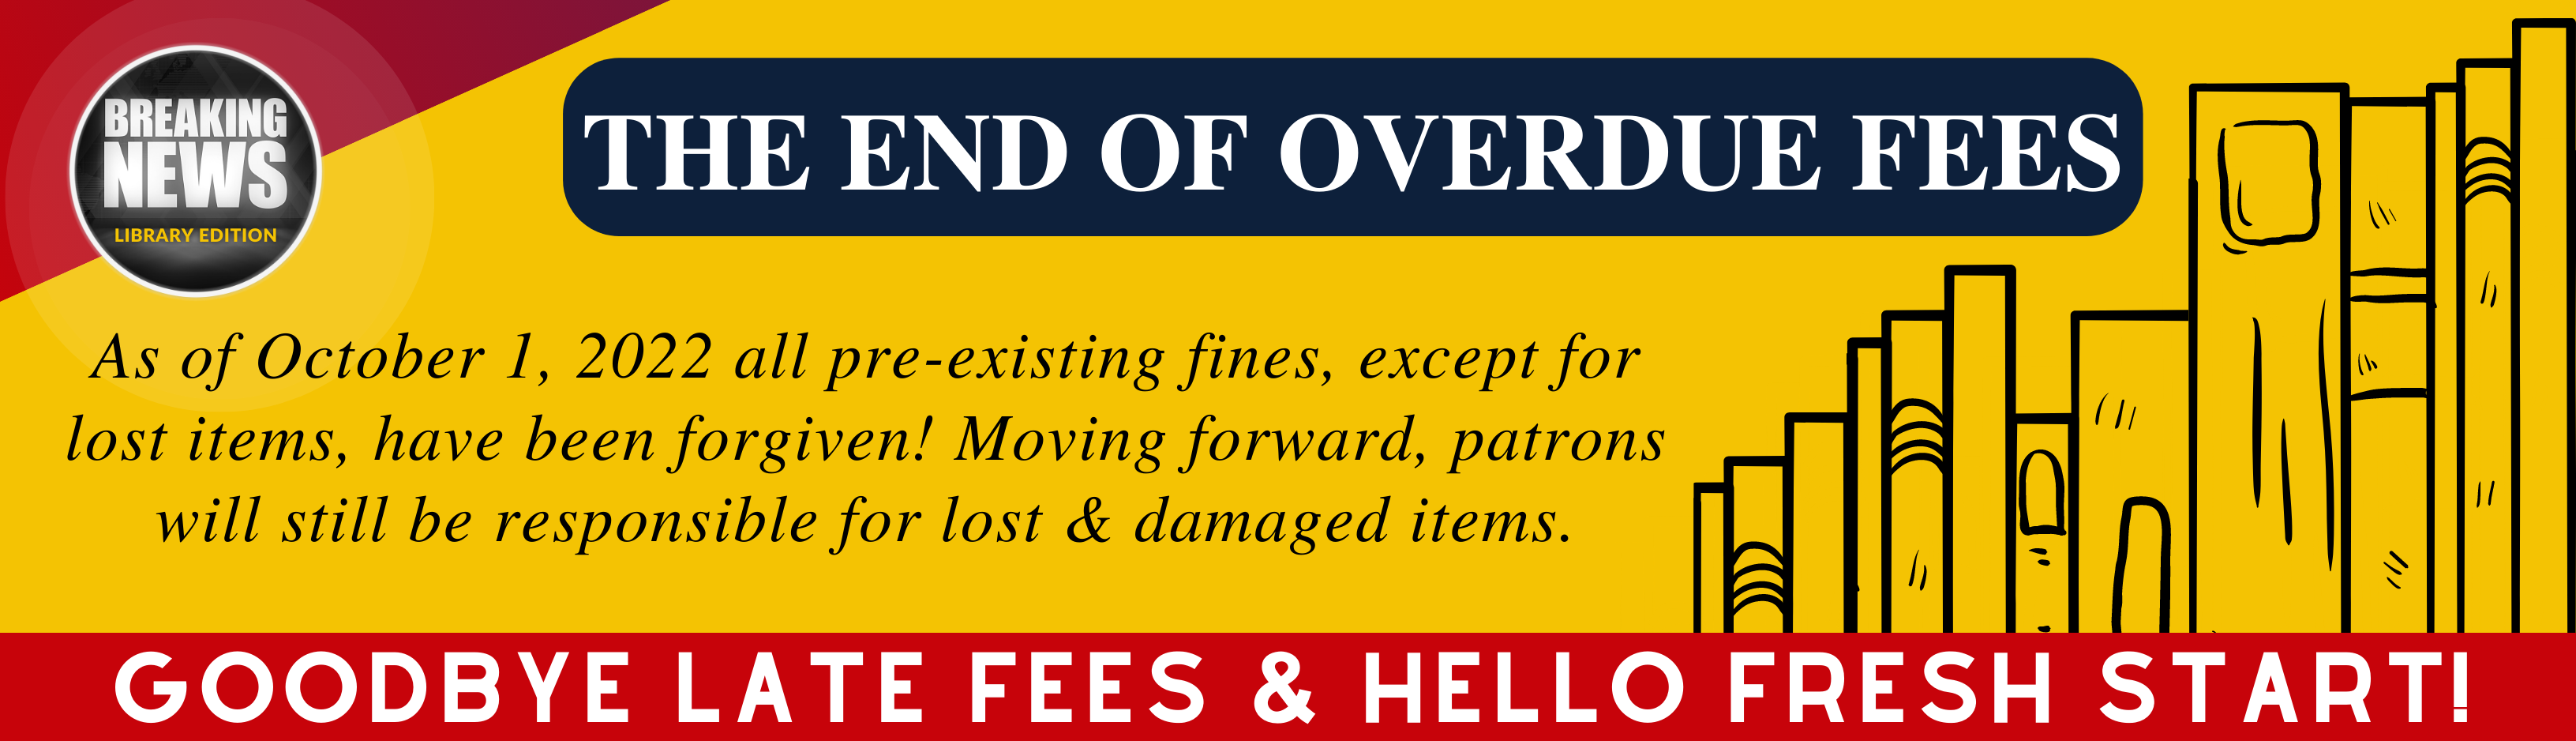 The End Overdue Fines! Overdue fines are no longer applied to accounts.